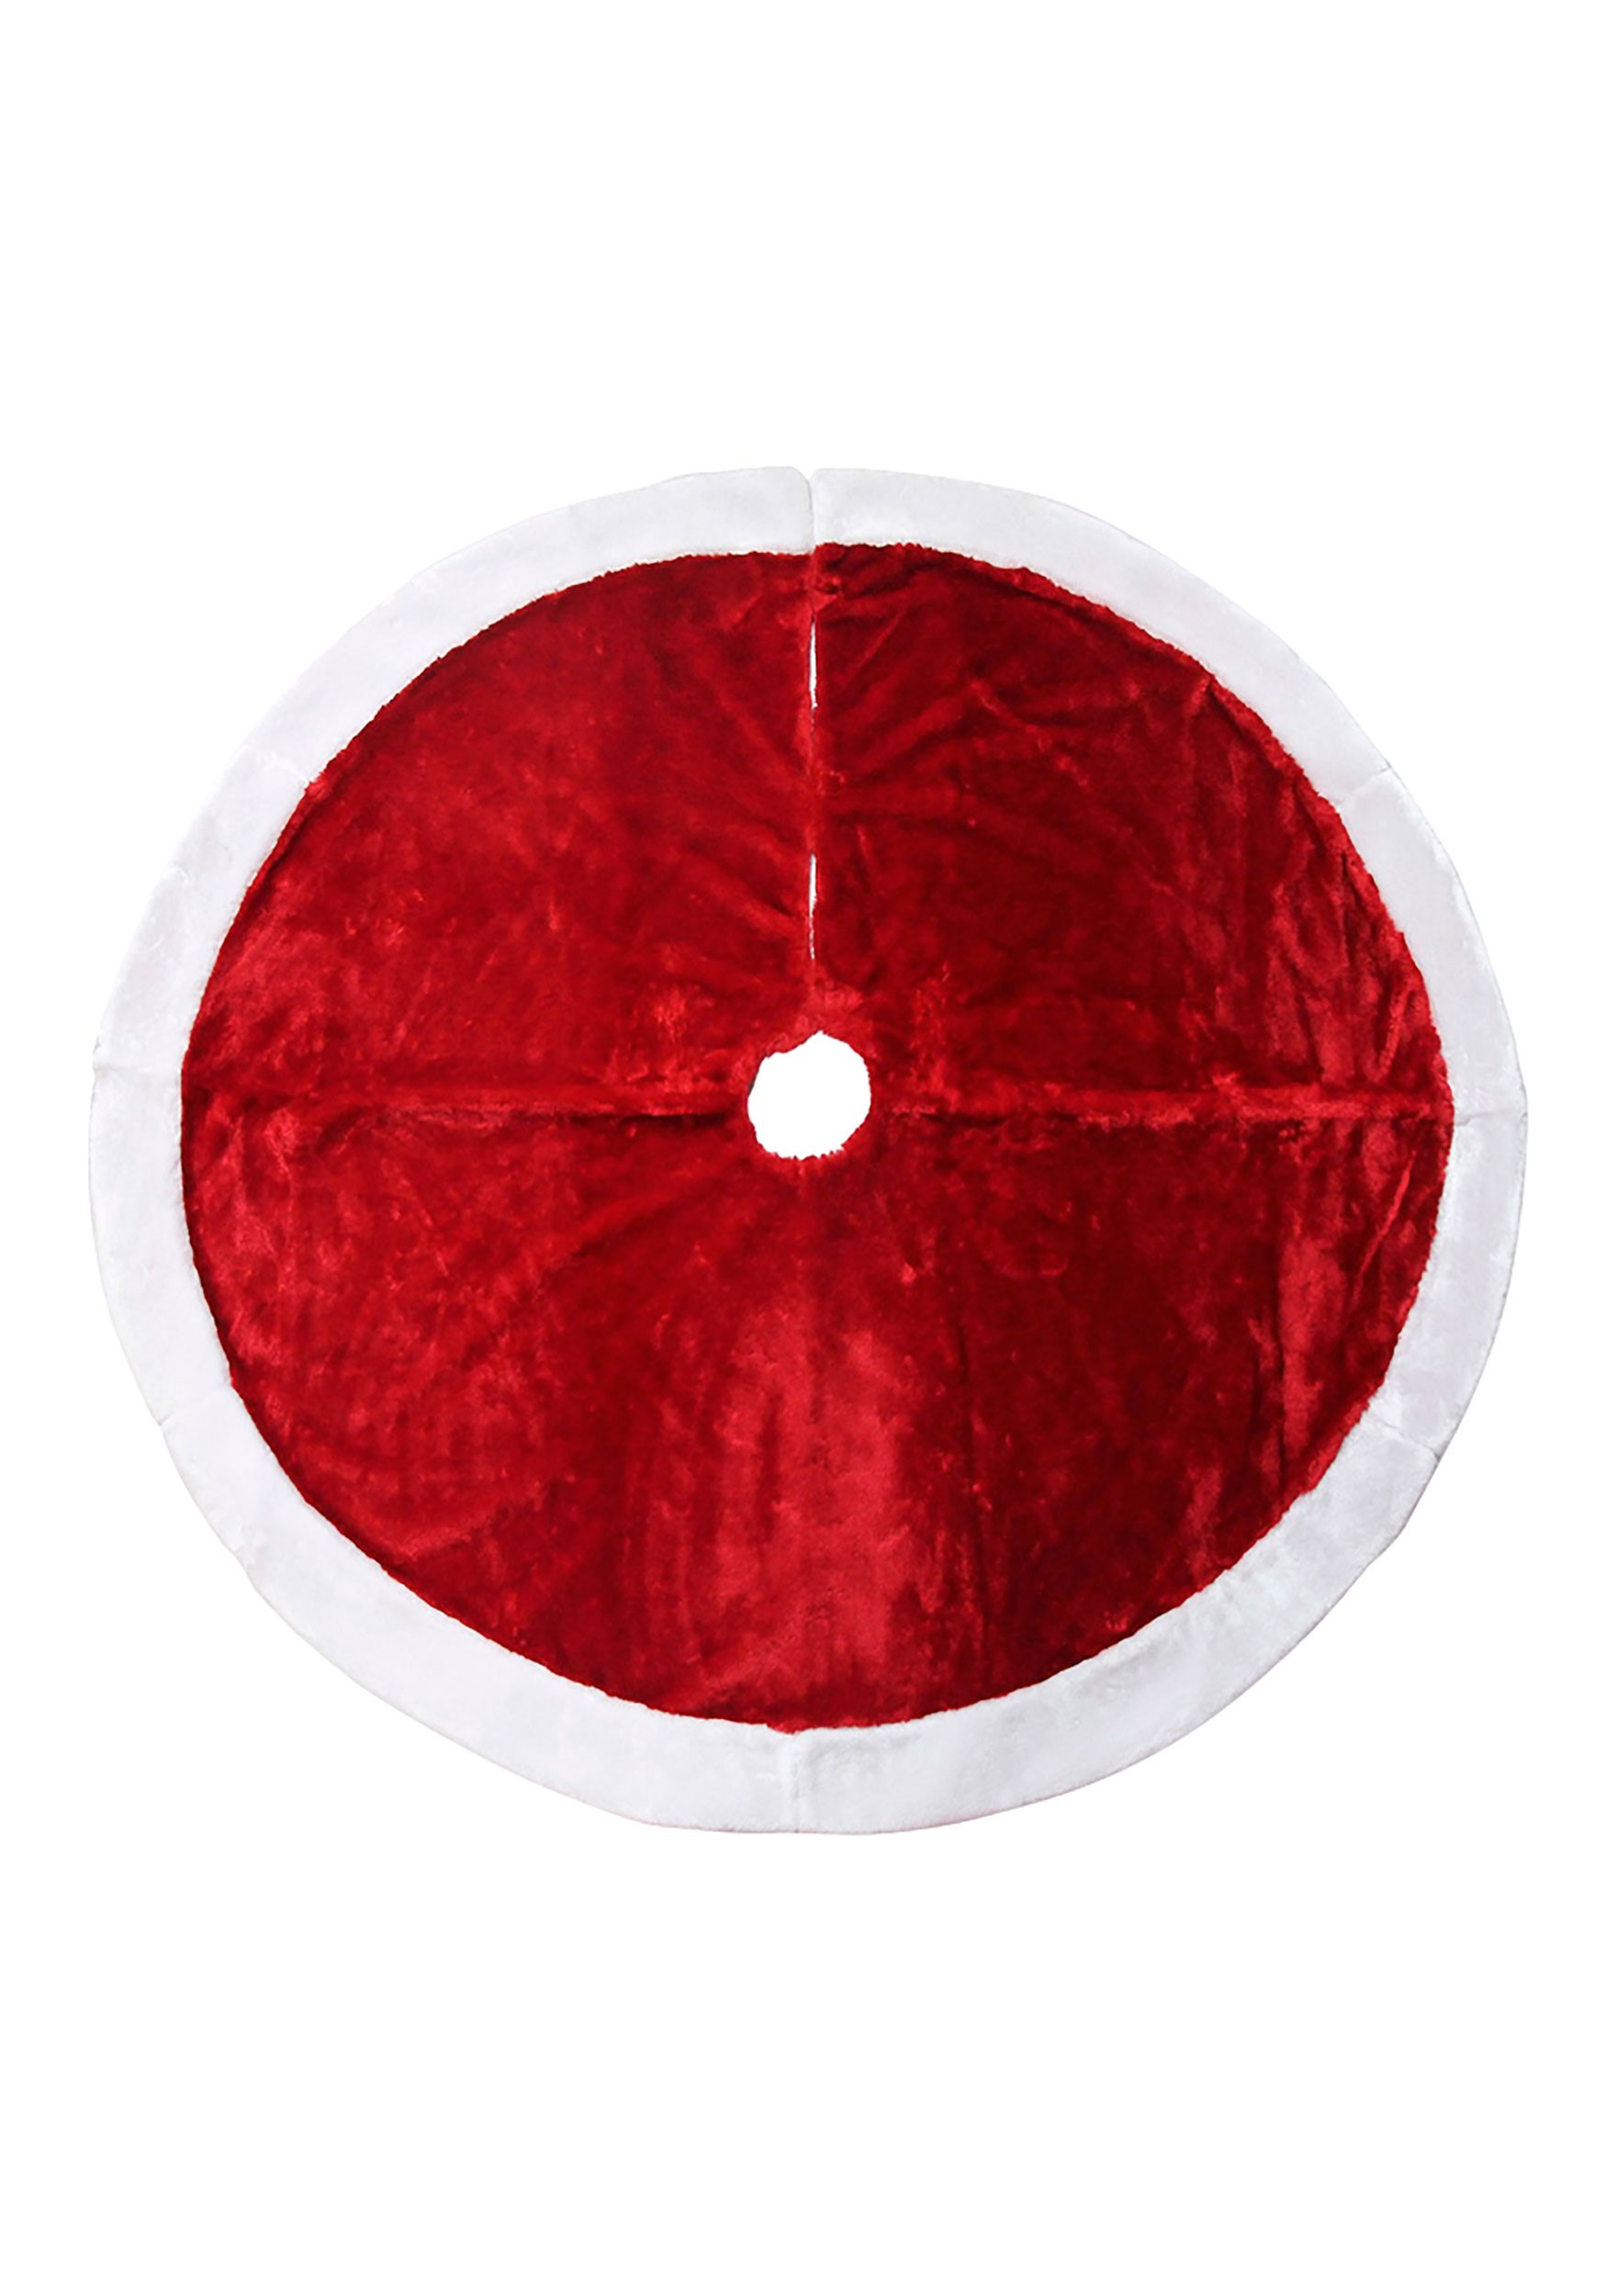 48" Basic Red Christmas Tree Skirt with White Fur